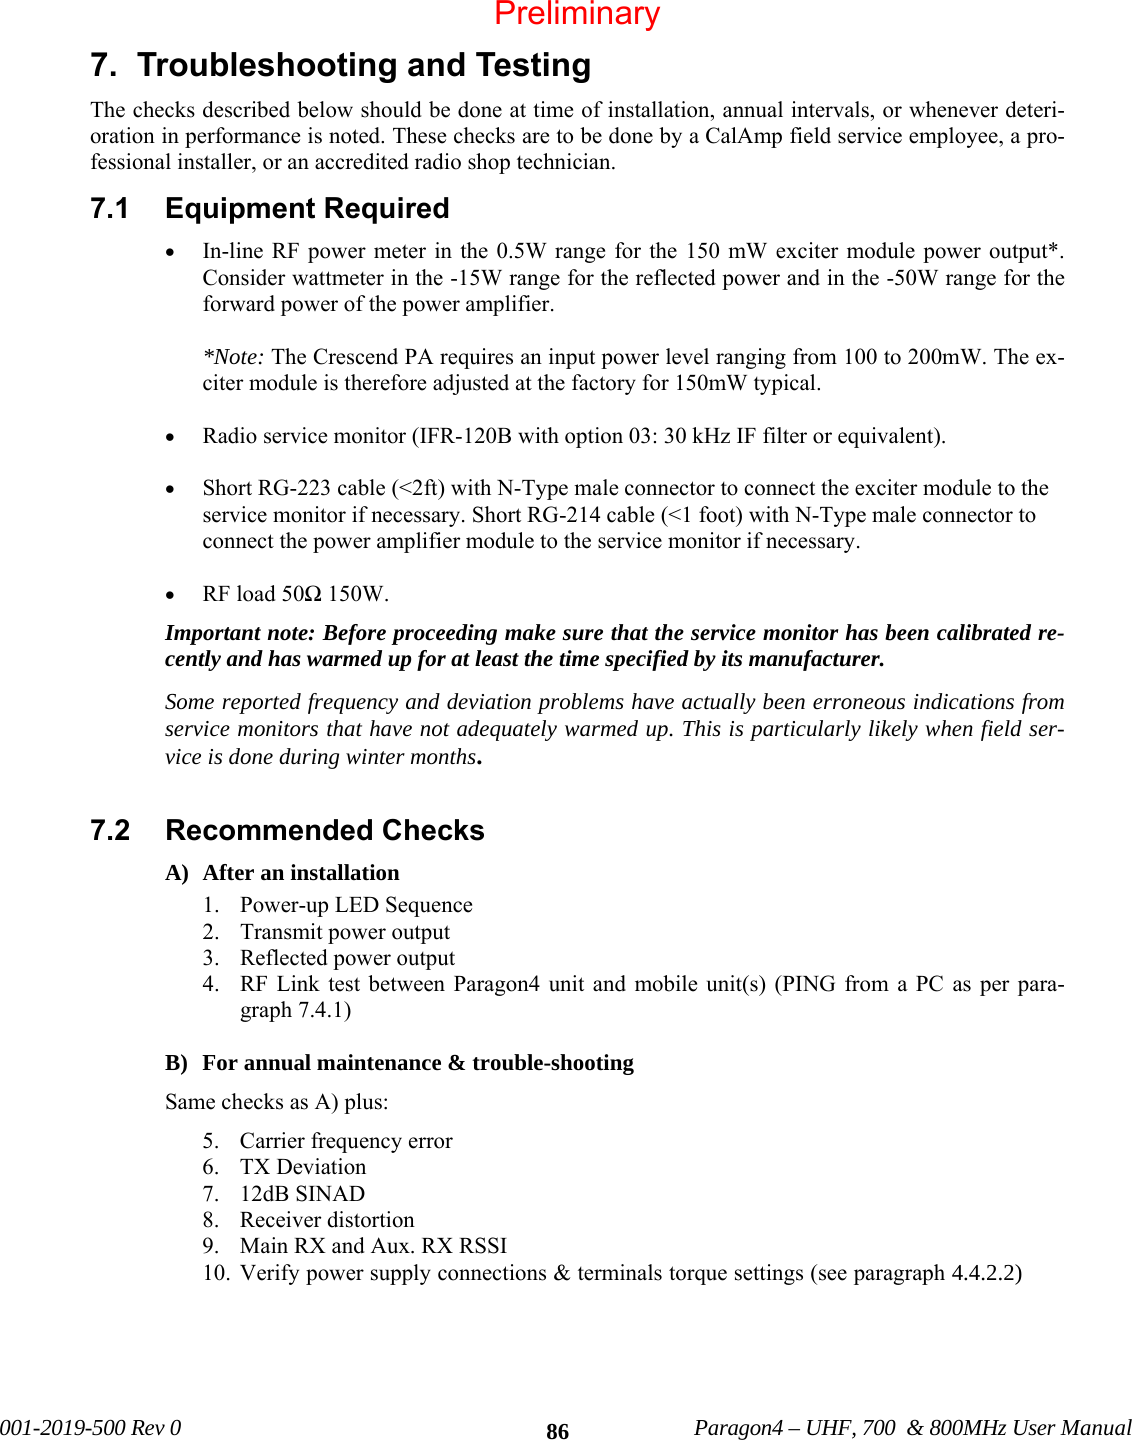              001-2019-500 Rev 0    Paragon4 – UHF, 700  &amp; 800MHz User Manual    867.  Troubleshooting and Testing  The checks described below should be done at time of installation, annual intervals, or whenever deteri-oration in performance is noted. These checks are to be done by a CalAmp field service employee, a pro-fessional installer, or an accredited radio shop technician. 7.1  Equipment Required  • In-line RF power meter in the 0.5W range for the 150 mW exciter module power output*. Consider wattmeter in the -15W range for the reflected power and in the -50W range for the forward power of the power amplifier.  *Note: The Crescend PA requires an input power level ranging from 100 to 200mW. The ex-citer module is therefore adjusted at the factory for 150mW typical.   • Radio service monitor (IFR-120B with option 03: 30 kHz IF filter or equivalent).  • Short RG-223 cable (&lt;2ft) with N-Type male connector to connect the exciter module to the service monitor if necessary. Short RG-214 cable (&lt;1 foot) with N-Type male connector to connect the power amplifier module to the service monitor if necessary.  • RF load 50Ω 150W. Important note: Before proceeding make sure that the service monitor has been calibrated re-cently and has warmed up for at least the time specified by its manufacturer.  Some reported frequency and deviation problems have actually been erroneous indications from service monitors that have not adequately warmed up. This is particularly likely when field ser-vice is done during winter months.  7.2  Recommended Checks   A) After an installation 1. Power-up LED Sequence 2. Transmit power output 3. Reflected power output 4. RF Link test between Paragon4 unit and mobile unit(s) (PING from a PC as per para-graph 7.4.1)   B) For annual maintenance &amp; trouble-shooting Same checks as A) plus: 5. Carrier frequency error 6. TX Deviation 7. 12dB SINAD 8. Receiver distortion 9. Main RX and Aux. RX RSSI 10. Verify power supply connections &amp; terminals torque settings (see paragraph 4.4.2.2) Preliminary